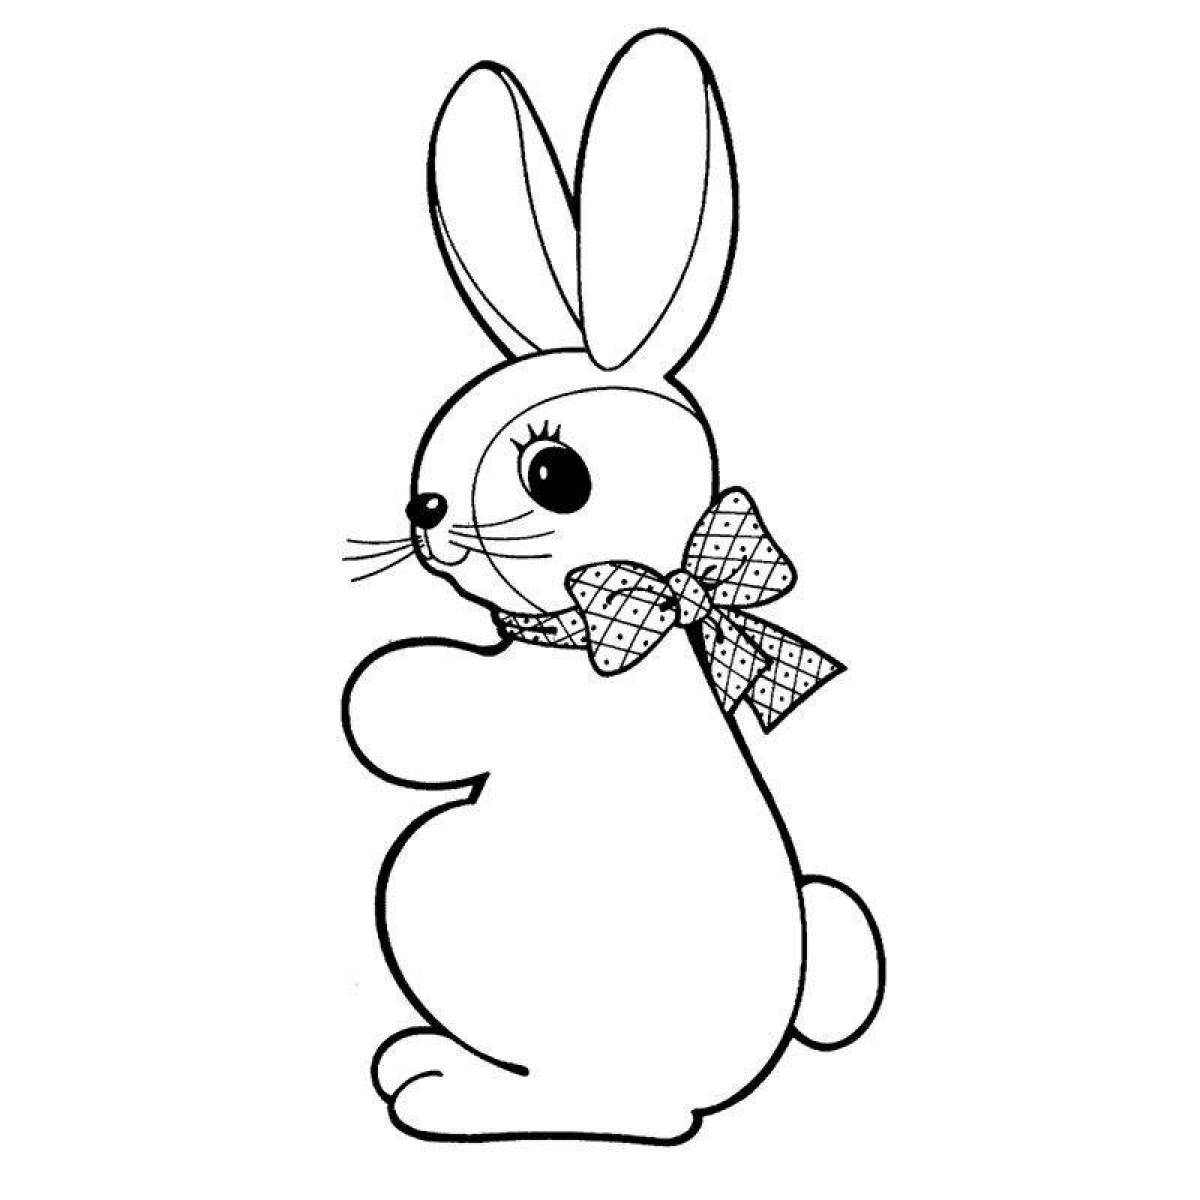 Coloring book bright year of the rabbit